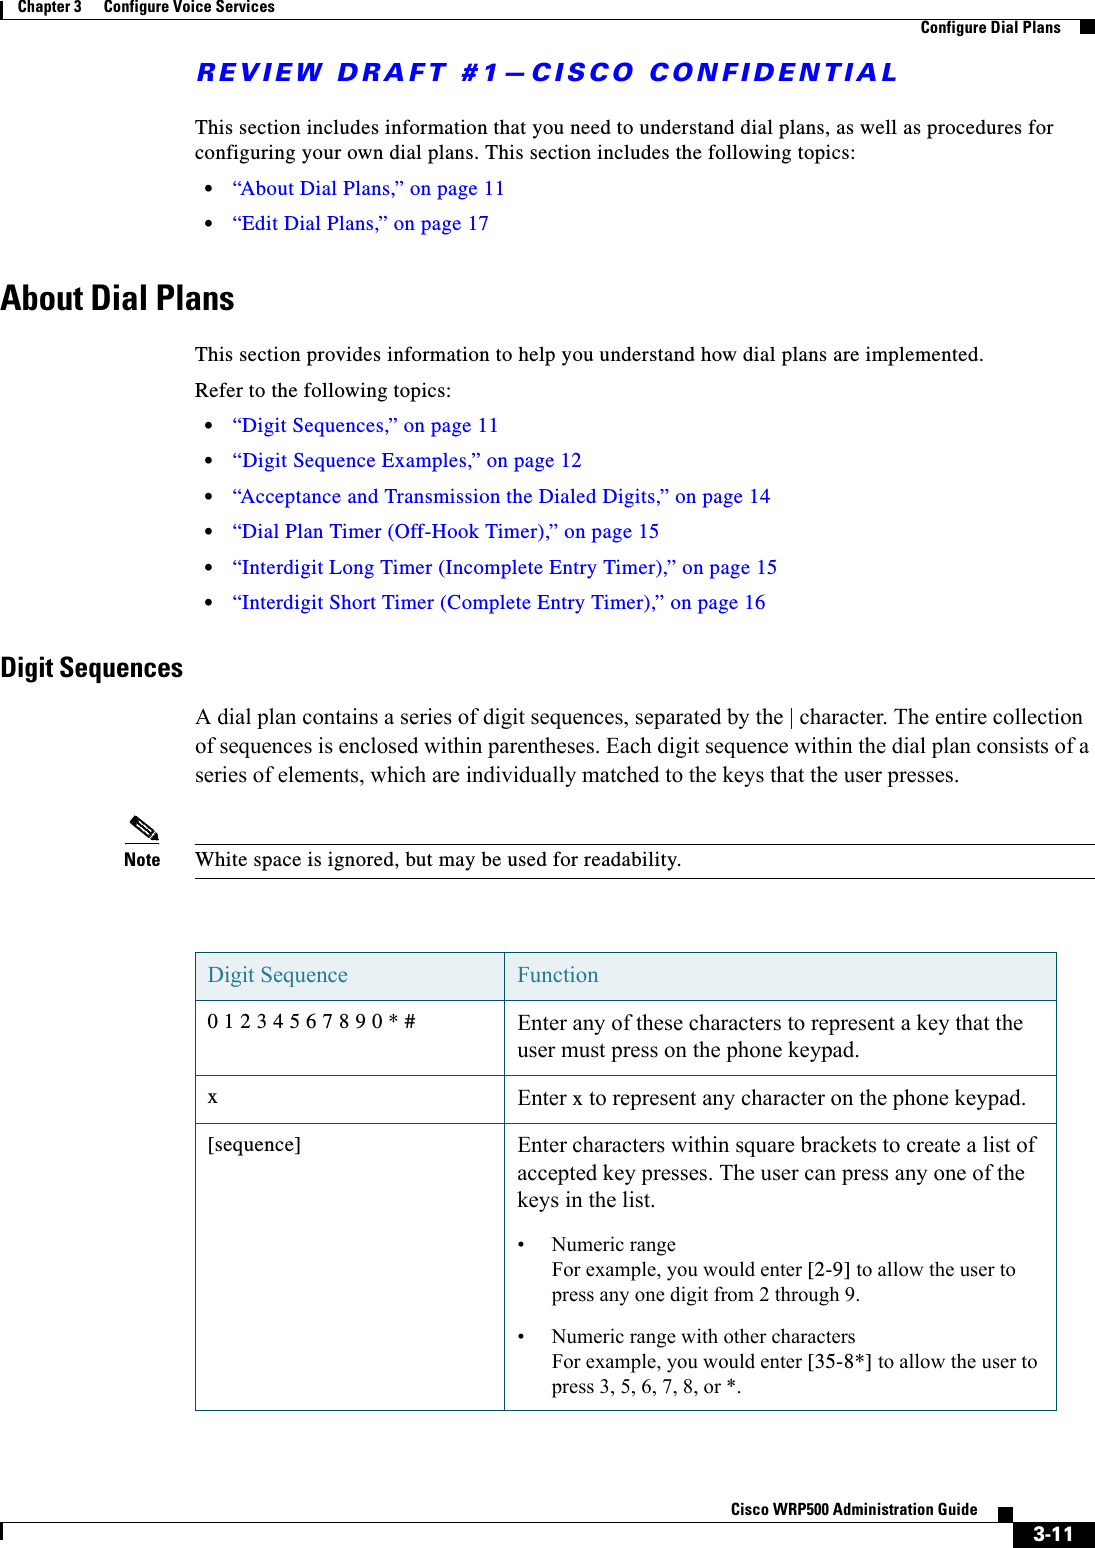 REVIEW DRAFT #1—CISCO CONFIDENTIAL3-11Cisco WRP500 Administration Guide Chapter 3      Configure Voice Services  Configure Dial PlansThis section includes information that you need to understand dial plans, as well as procedures for configuring your own dial plans. This section includes the following topics:•“About Dial Plans,” on page 11•“Edit Dial Plans,” on page 17About Dial PlansThis section provides information to help you understand how dial plans are implemented.Refer to the following topics:•“Digit Sequences,” on page 11•“Digit Sequence Examples,” on page 12•“Acceptance and Transmission the Dialed Digits,” on page 14•“Dial Plan Timer (Off-Hook Timer),” on page 15•“Interdigit Long Timer (Incomplete Entry Timer),” on page 15•“Interdigit Short Timer (Complete Entry Timer),” on page 16Digit SequencesA dial plan contains a series of digit sequences, separated by the | character. The entire collection of sequences is enclosed within parentheses. Each digit sequence within the dial plan consists of a series of elements, which are individually matched to the keys that the user presses. Note White space is ignored, but may be used for readability.Digit Sequence Function0 1 2 3 4 5 6 7 8 9 0 * # Enter any of these characters to represent a key that the user must press on the phone keypad.xEnter x to represent any character on the phone keypad.[sequence] Enter characters within square brackets to create a list of accepted key presses. The user can press any one of the keys in the list.• Numeric range For example, you would enter [2-9] to allow the user to press any one digit from 2 through 9.• Numeric range with other charactersFor example, you would enter [35-8*] to allow the user to press 3, 5, 6, 7, 8, or *.